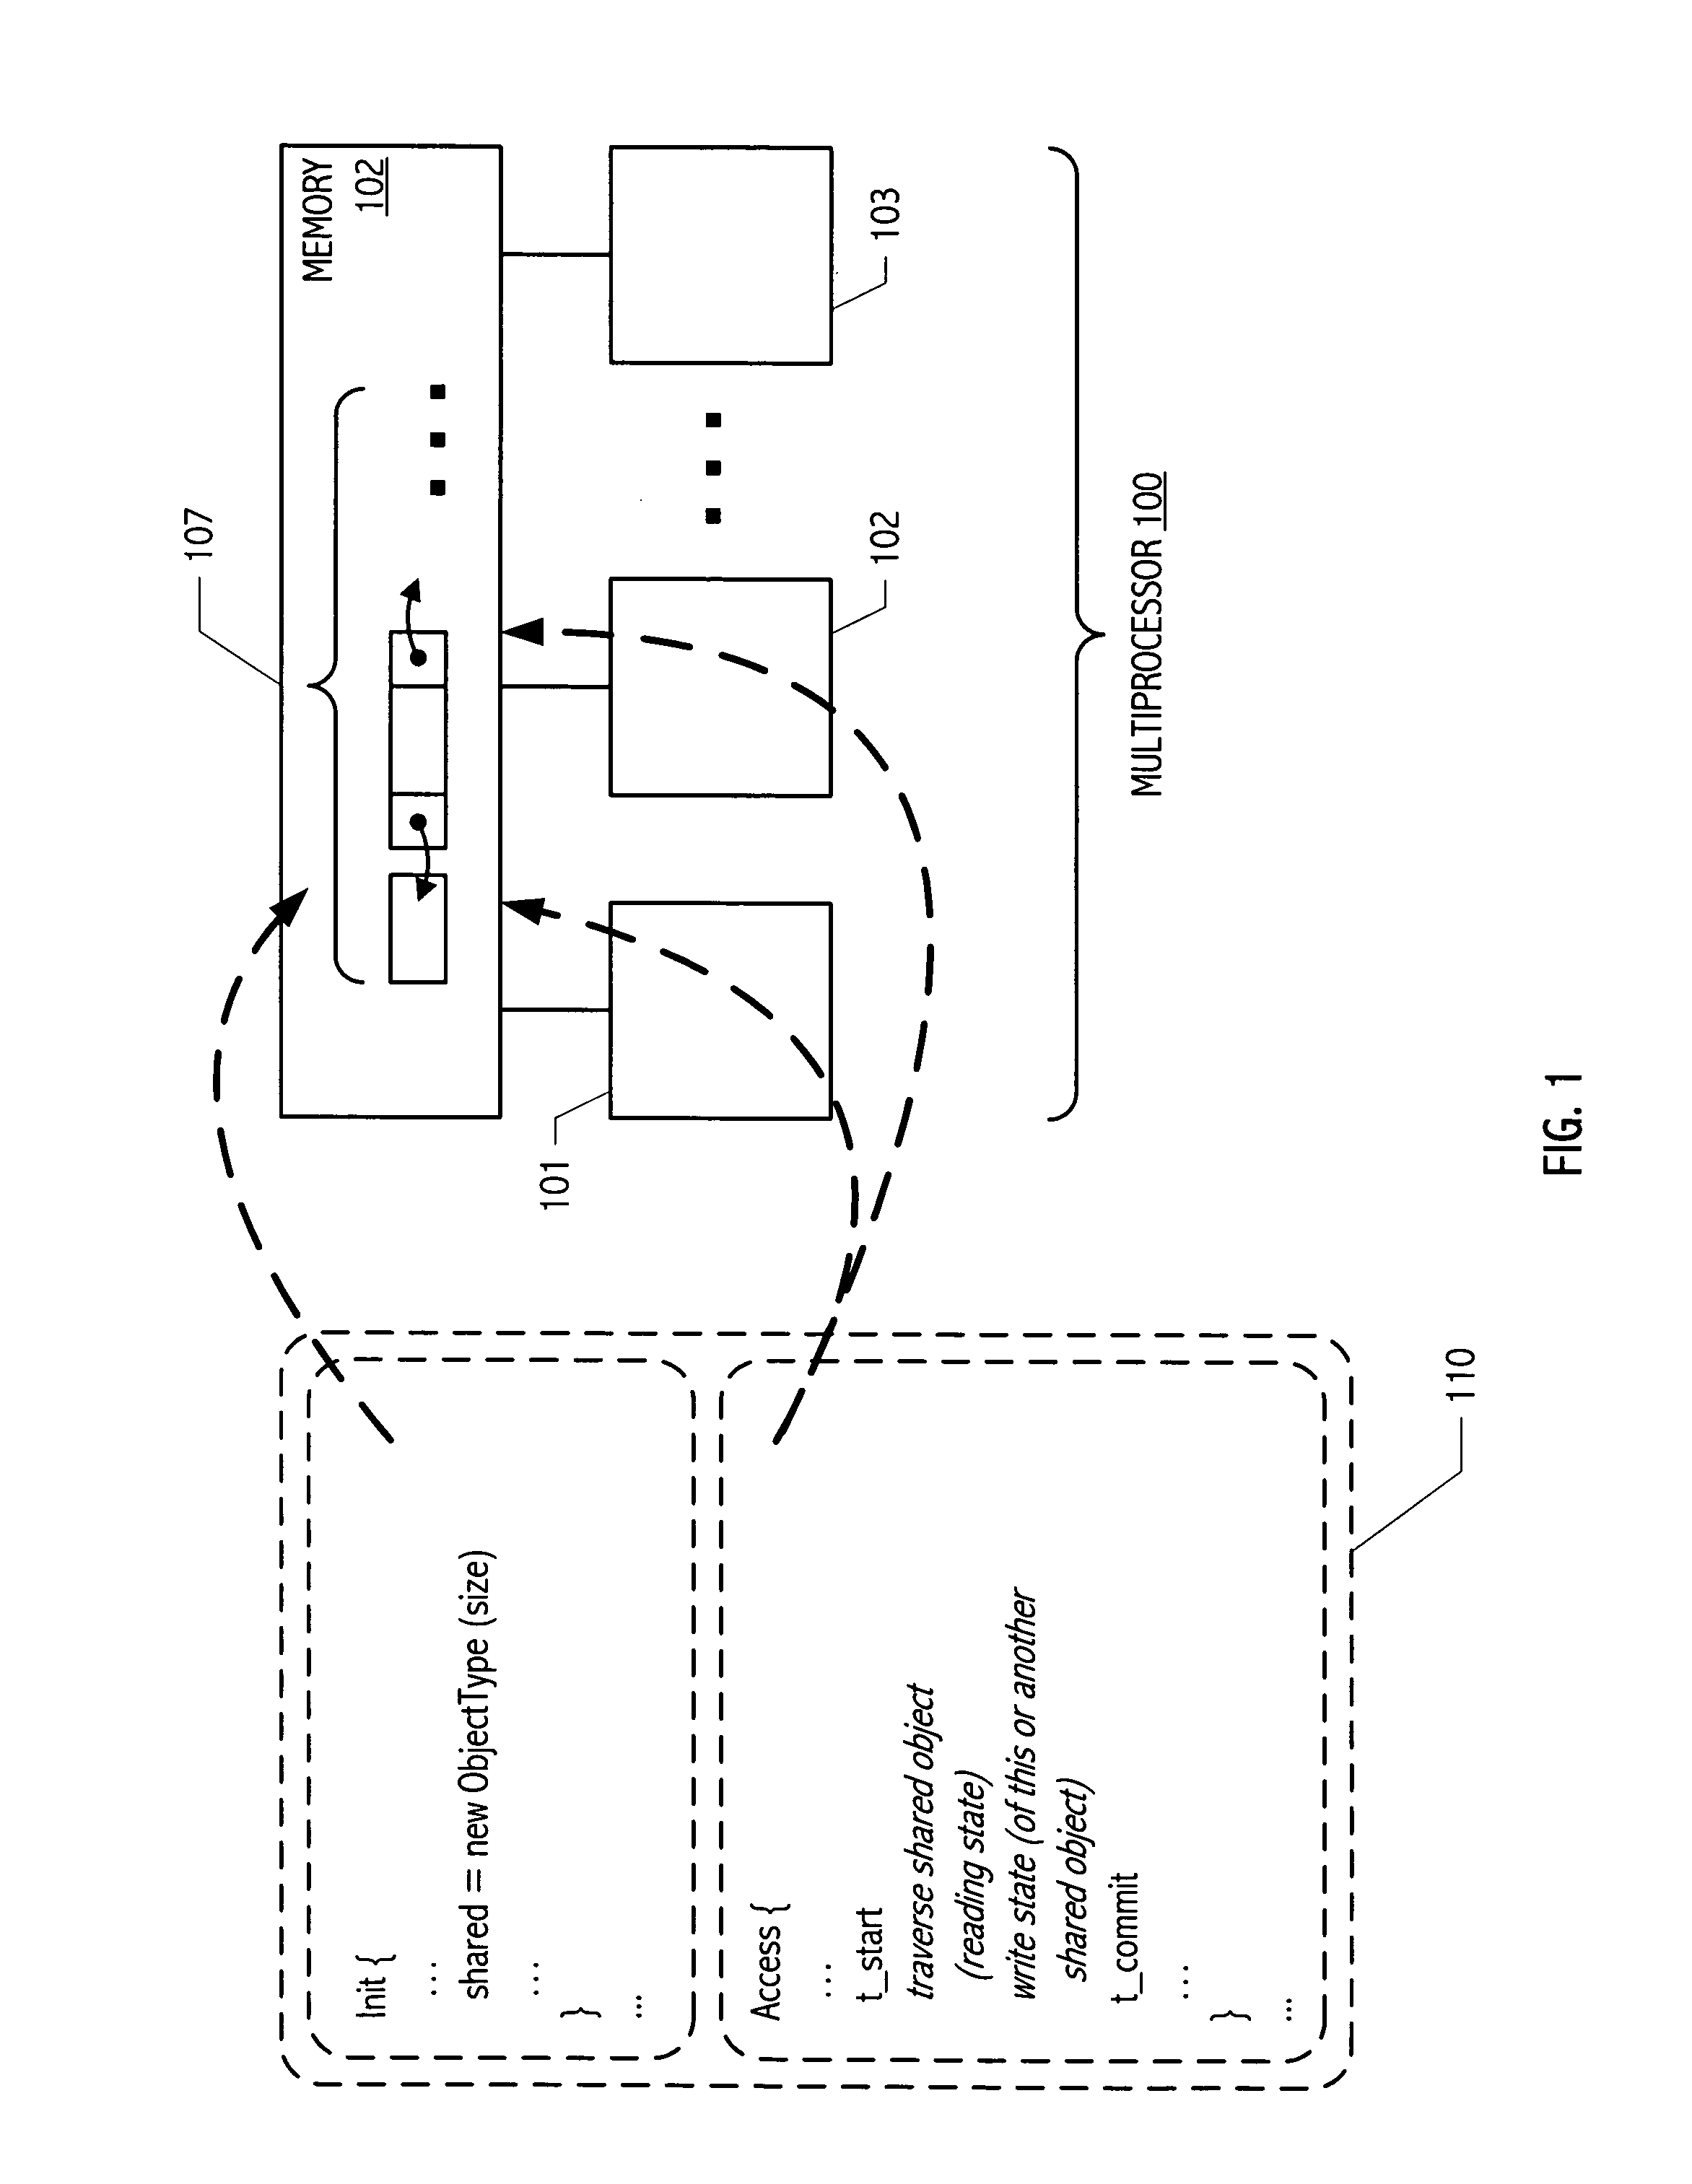 Using transactional memory with early release to implement non-blocking dynamic-sized data structure